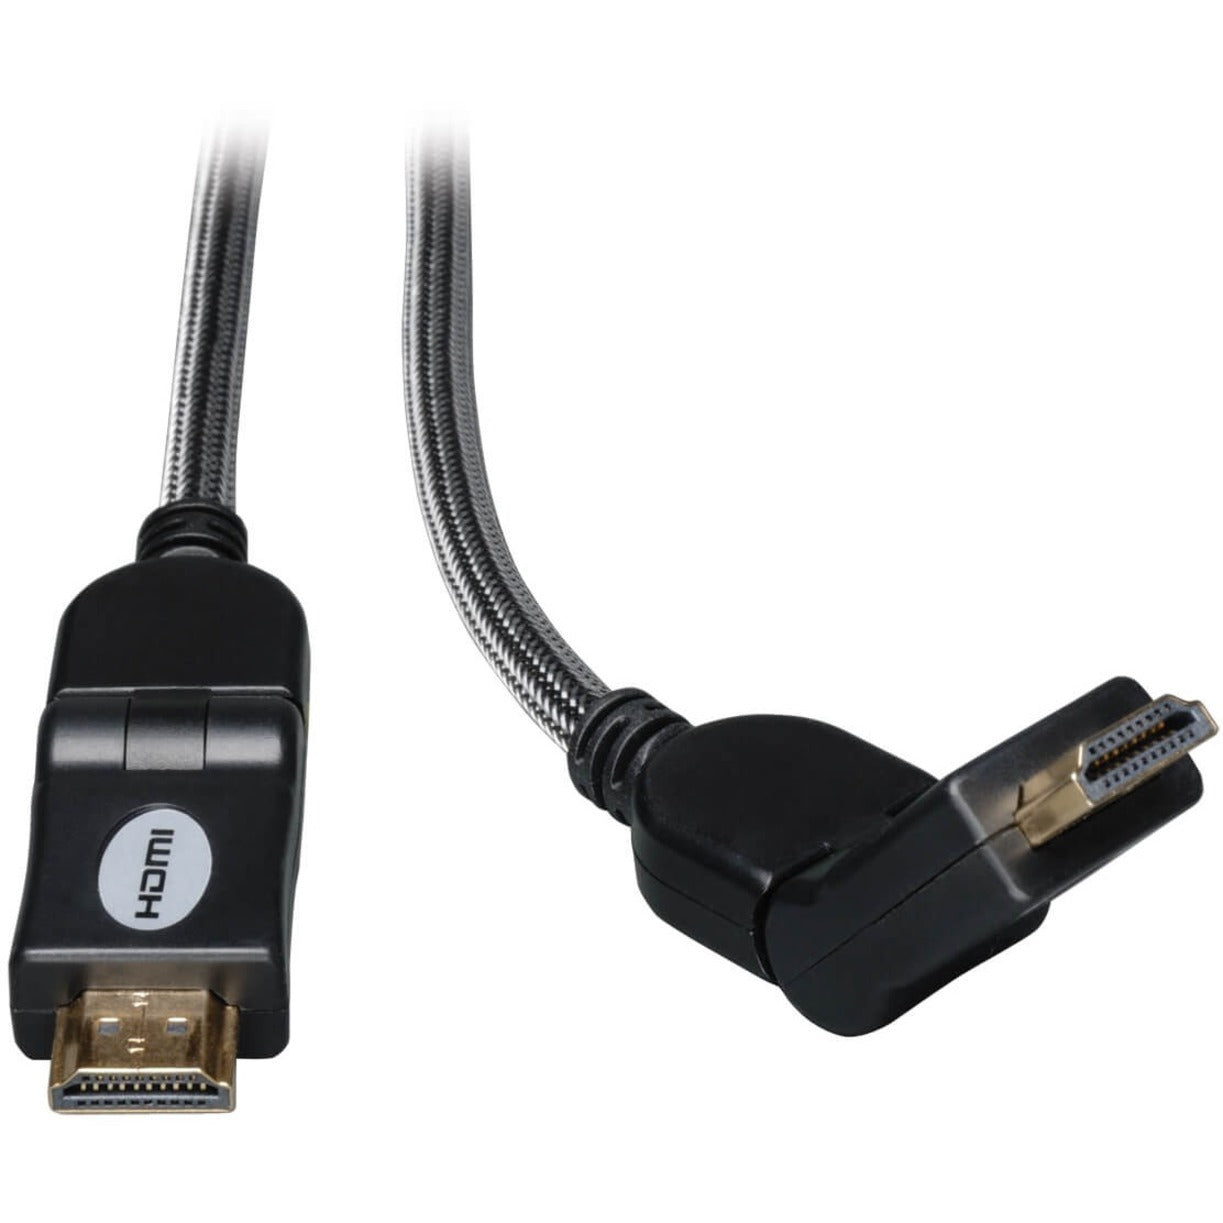 Tripp Lite by Eaton P568-010-SW HDMI Cable, 10-ft. Gold Cable with Swivel Connectors